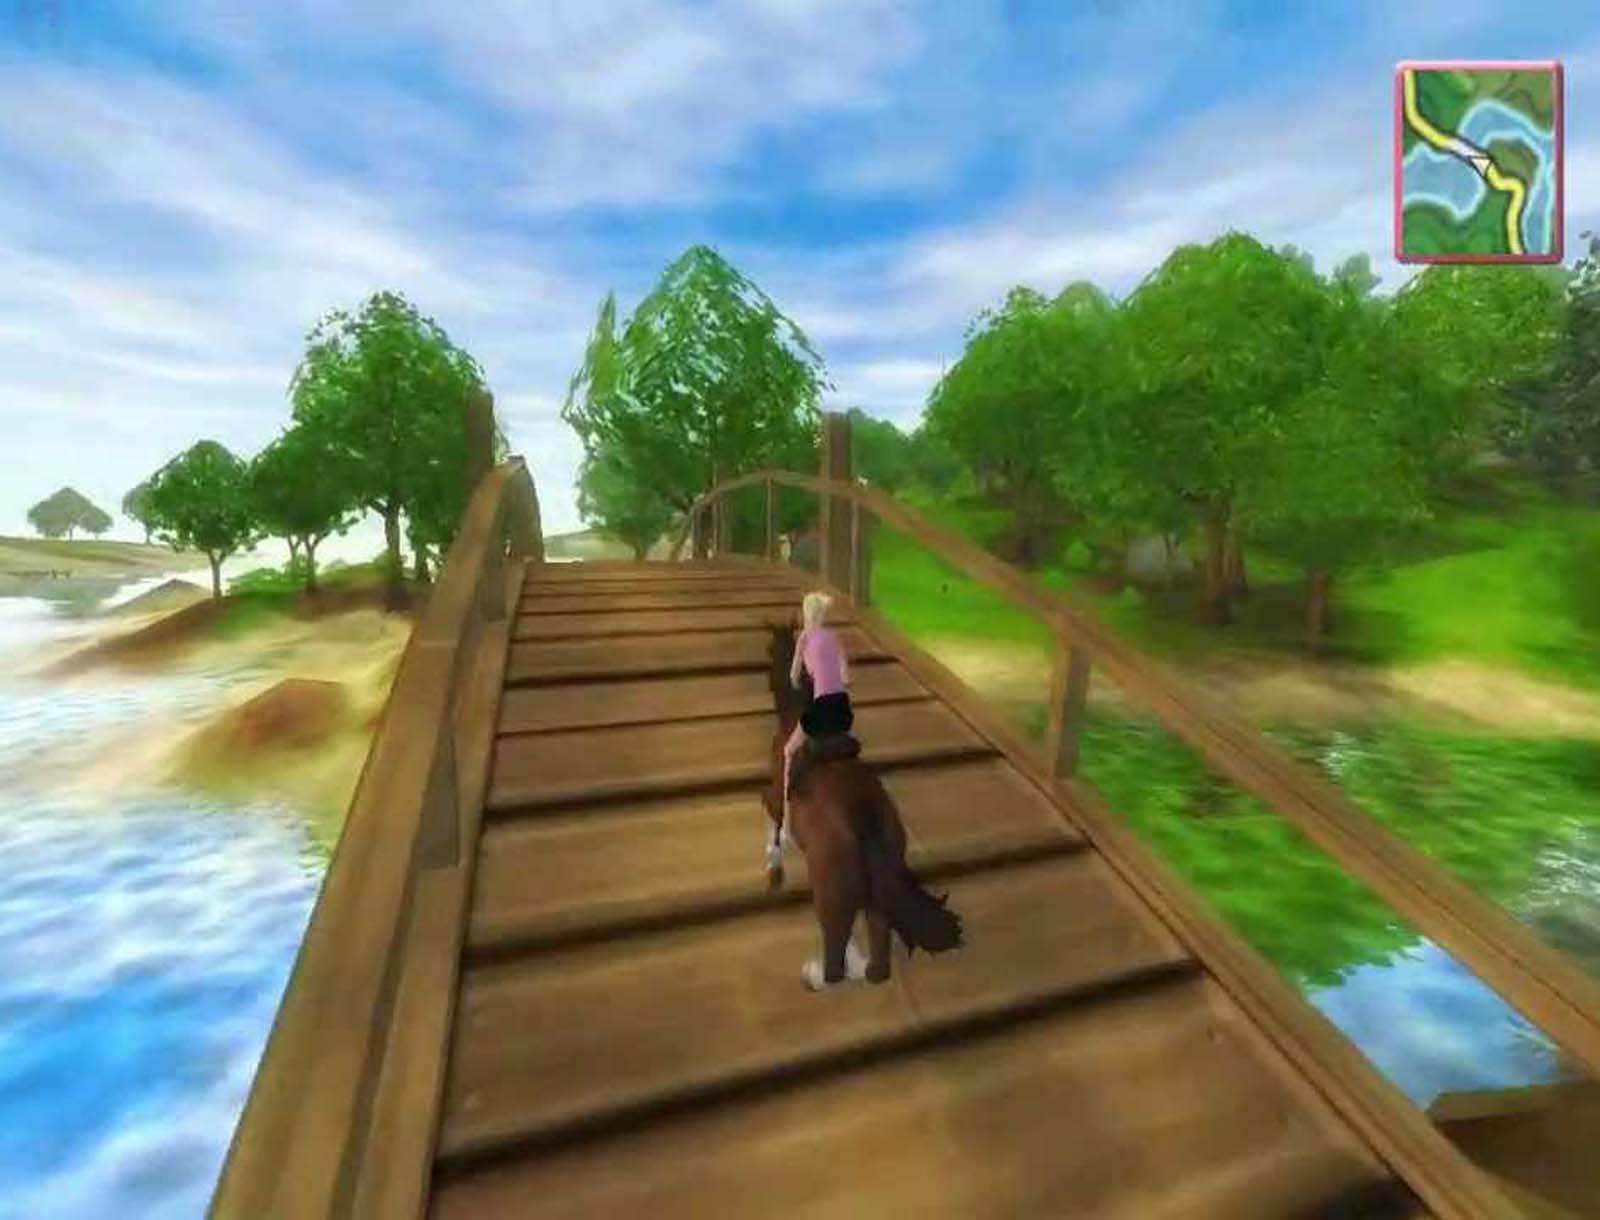 Barbie Horse Adventures: Riding Camp - Playstation 2 Gameplay